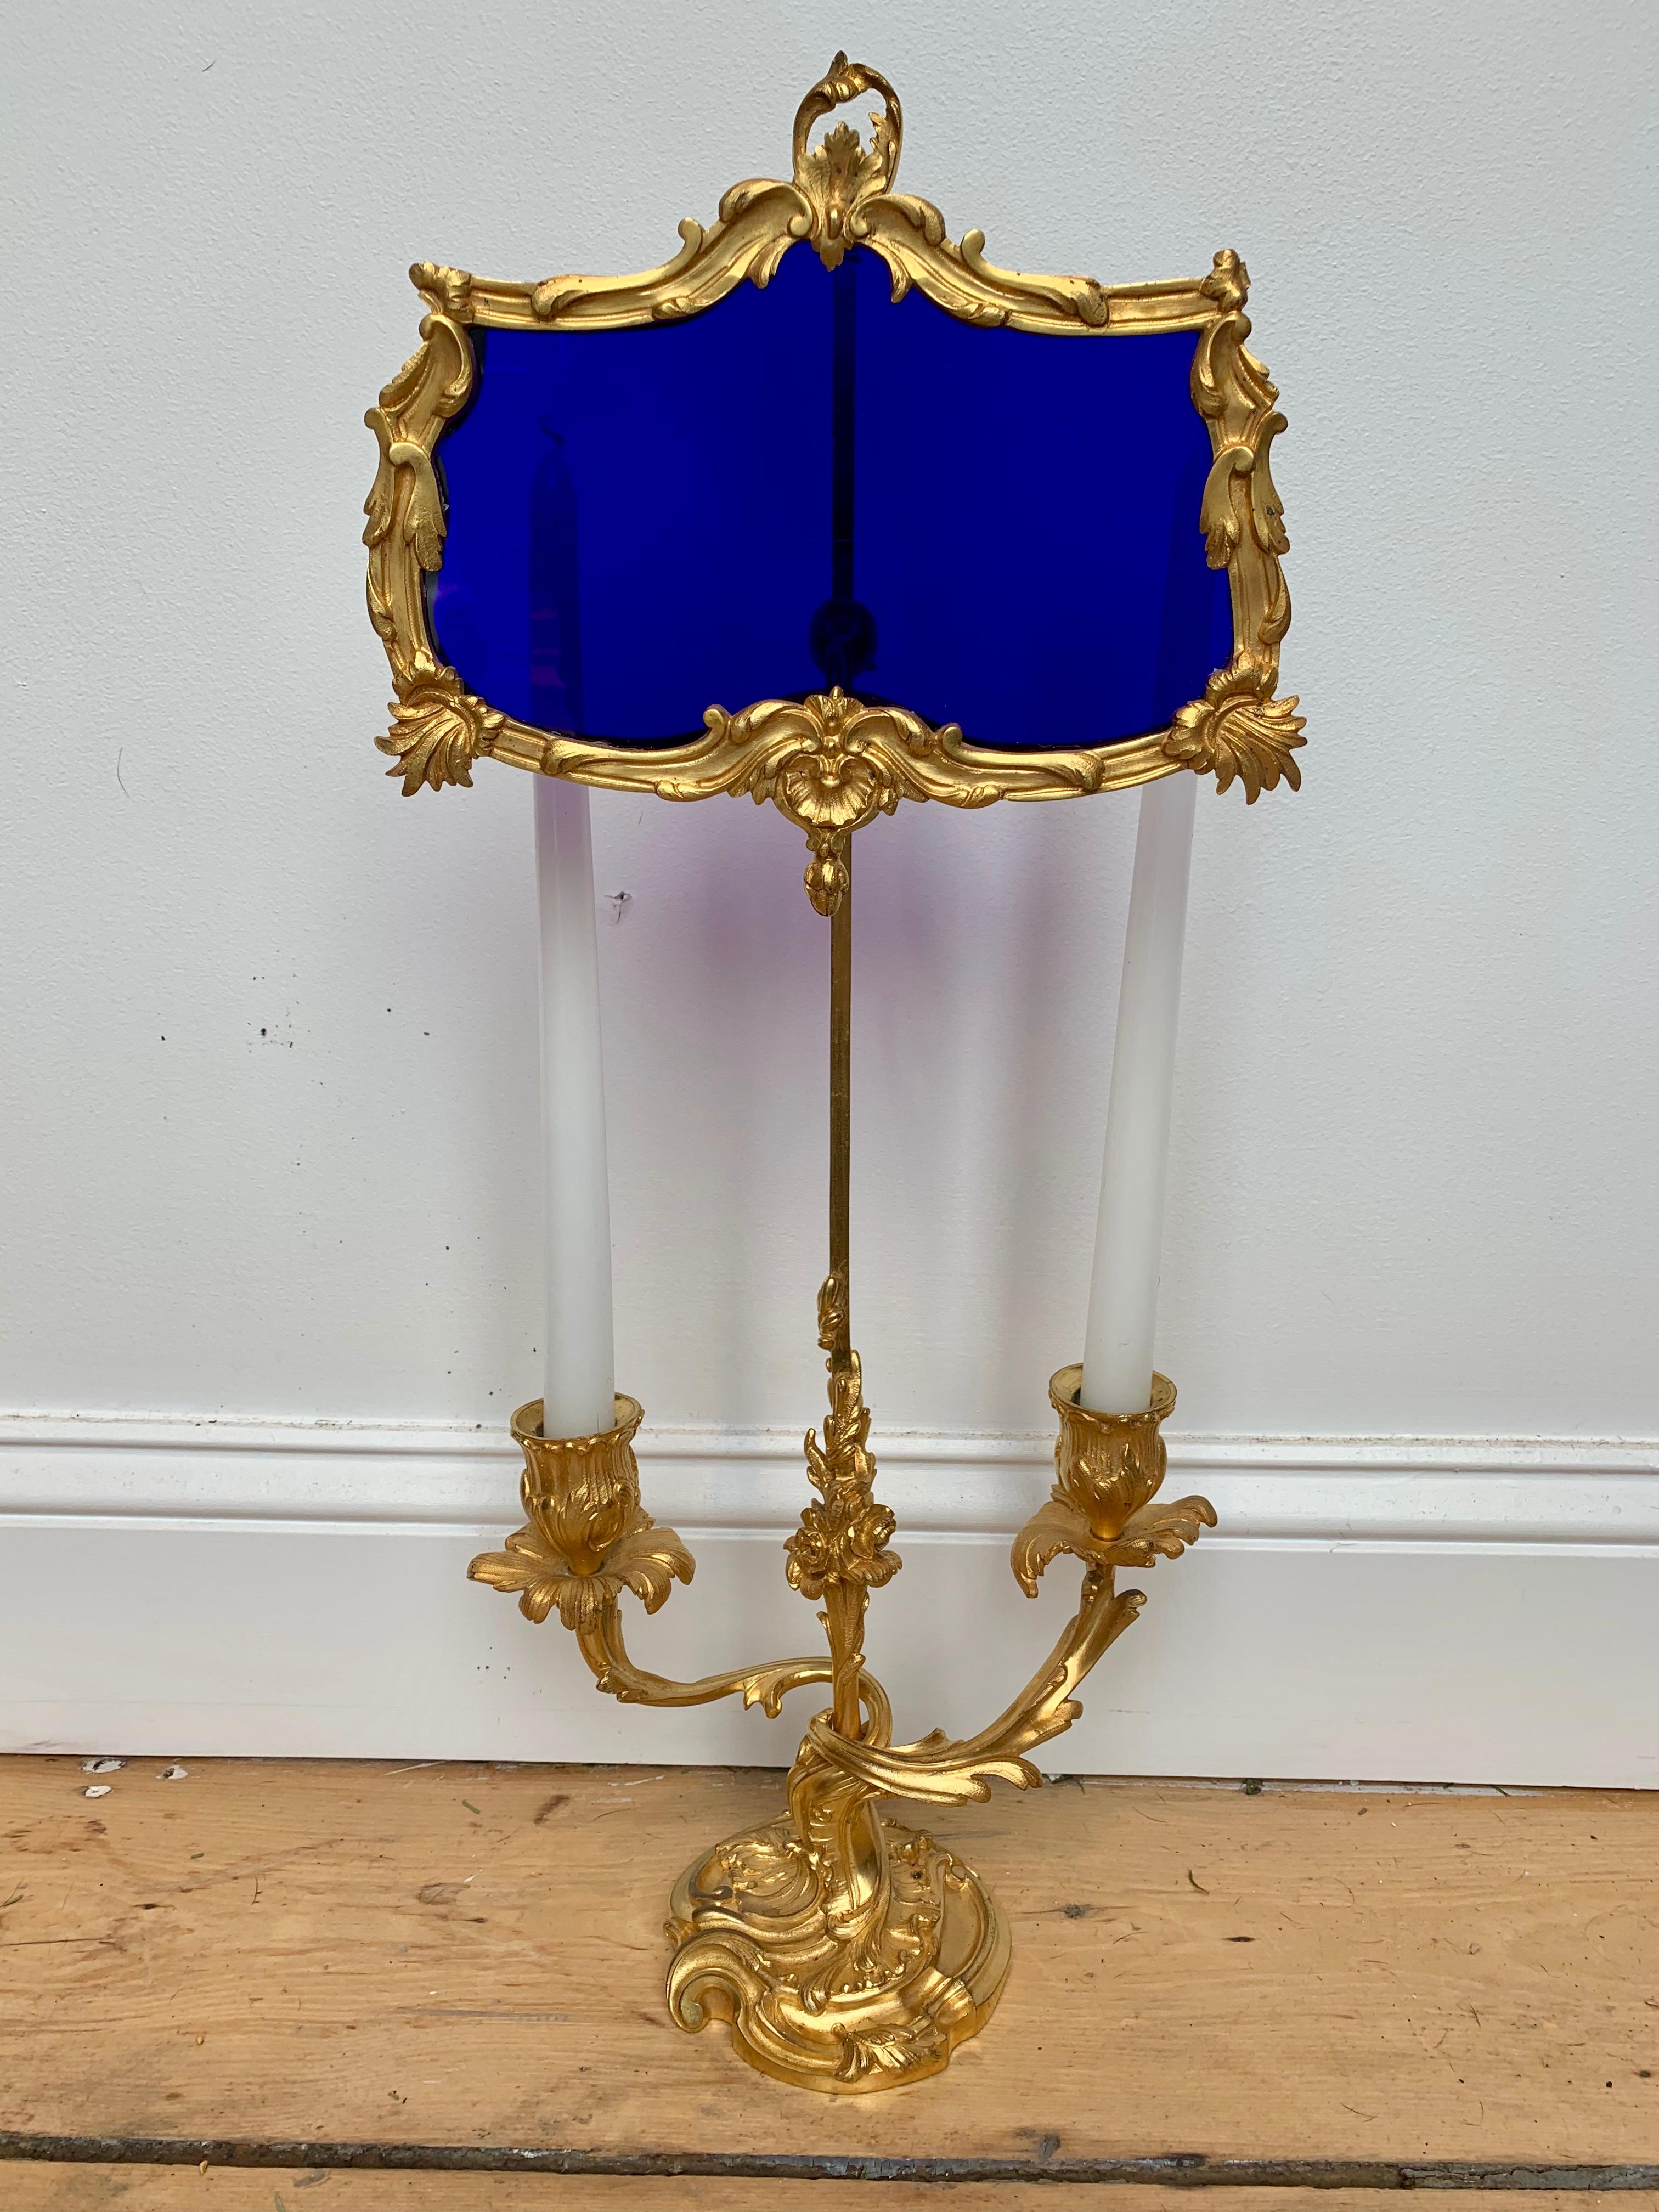 Late 19th century adjustable ormolu and cobalt glass miracle Bouillotte lamp

of fire gilt bronze. Two arms with foliate styling.